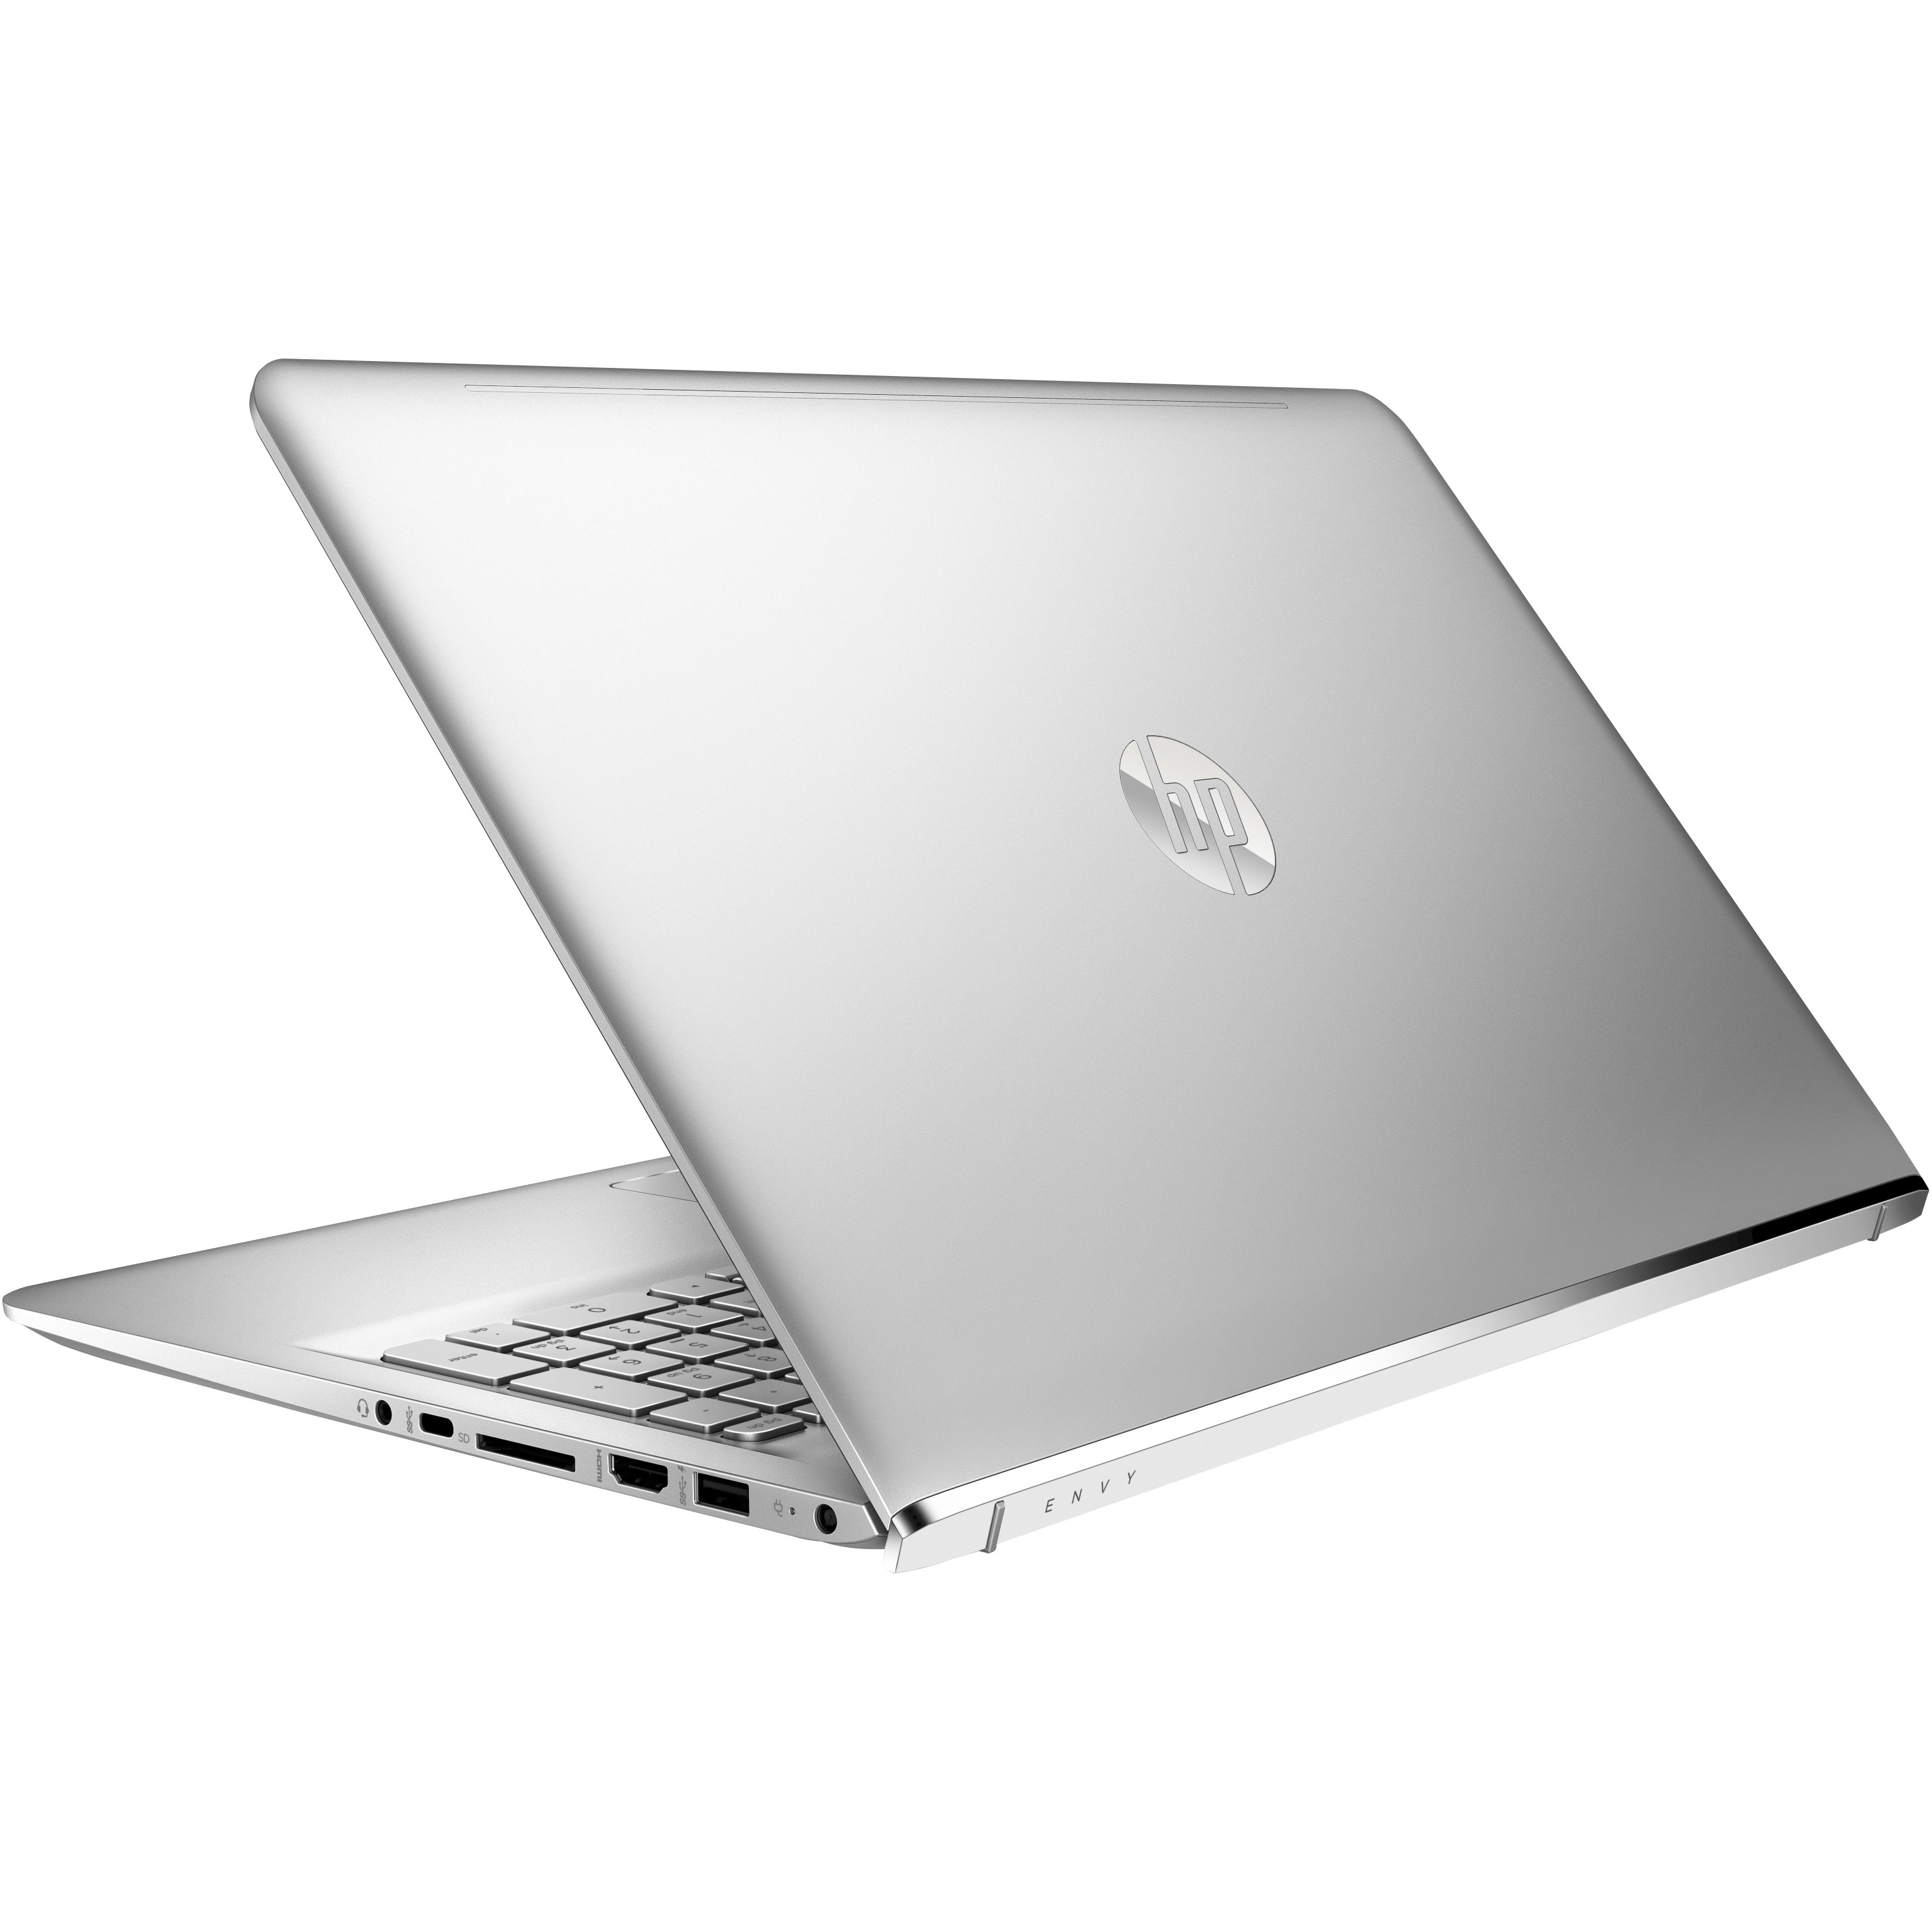 ENVY 15-as000 Notebook PC (Touch)